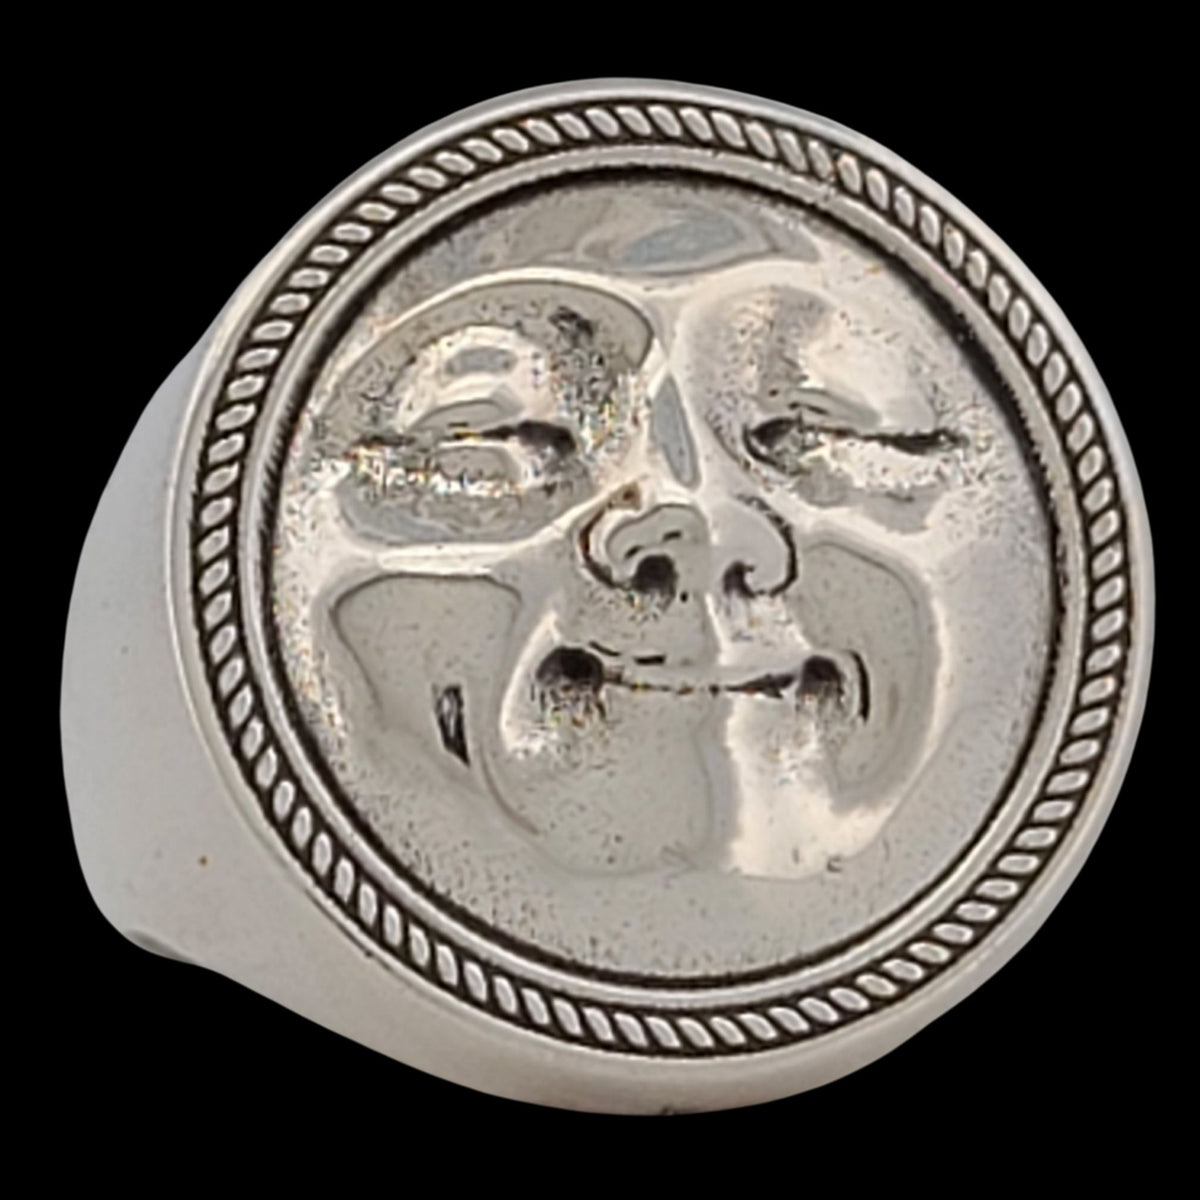 TRANQUILITY SMILING MOON FACE Signet Ring - Starting at $169